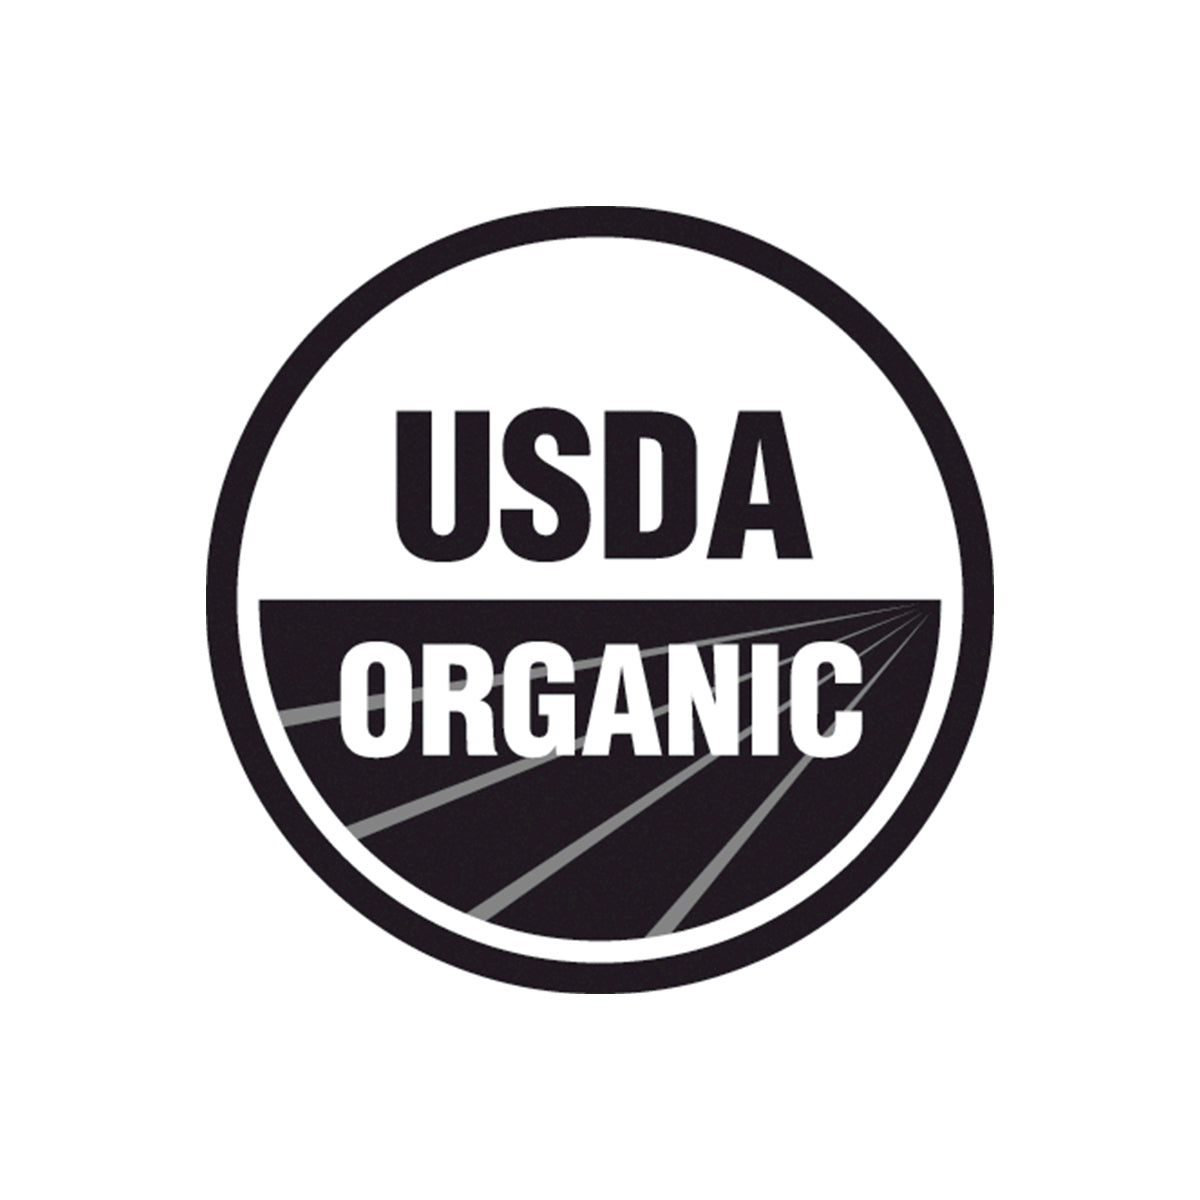 We offer products that are certified organic according to the USDA National Organic Program standards, whenever possible. We use Oregon Tilth, a leader in organic certification since 1974. 